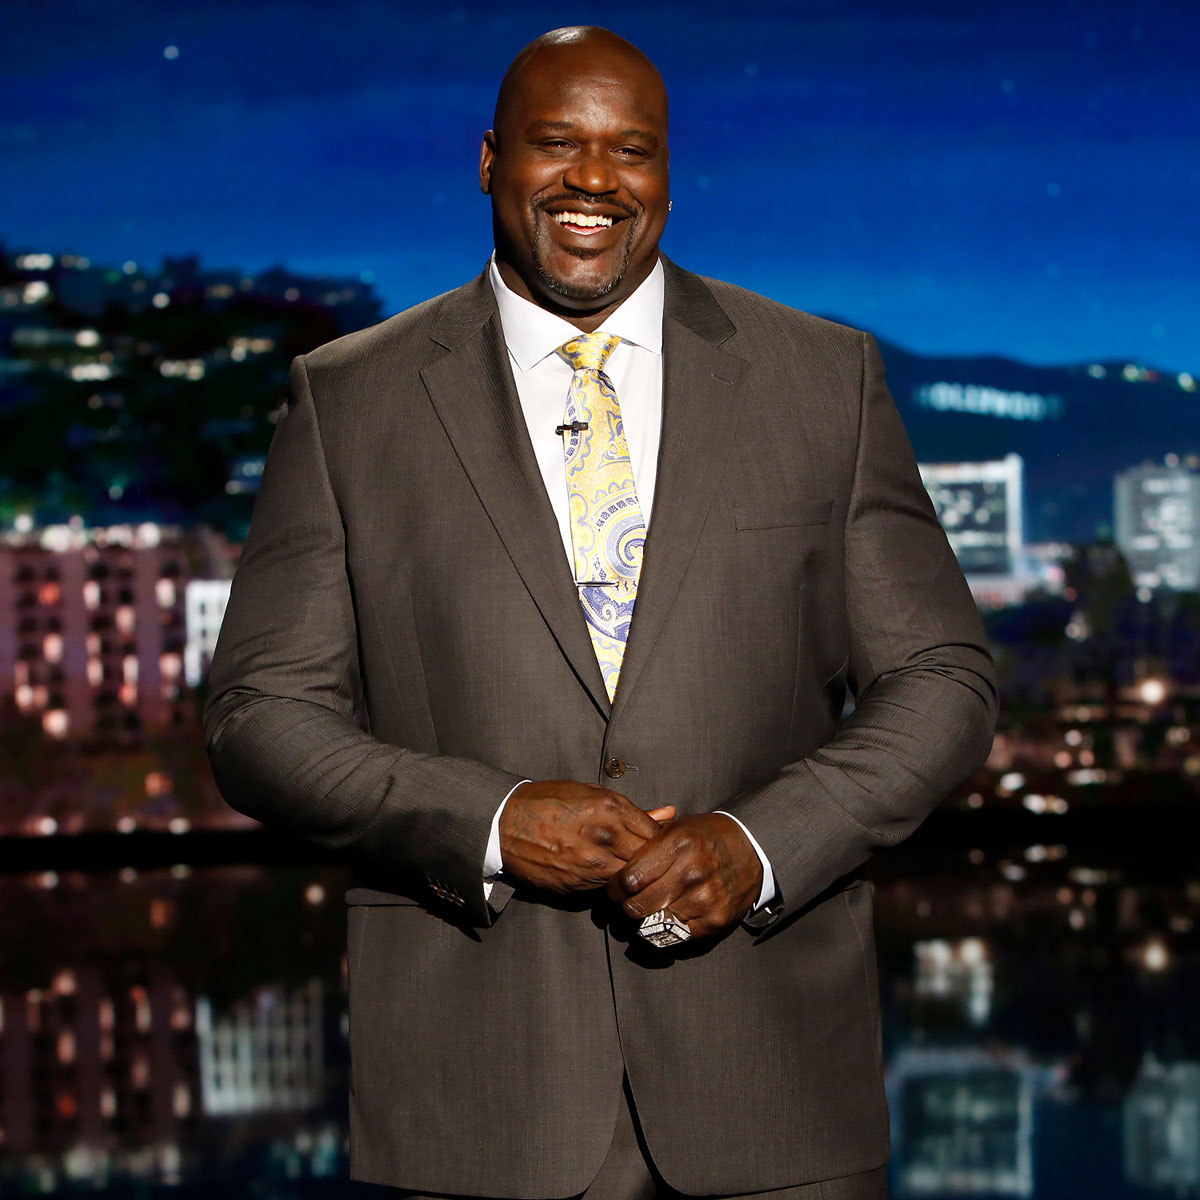 Why is Shaquille O'Neal gone, in hospital